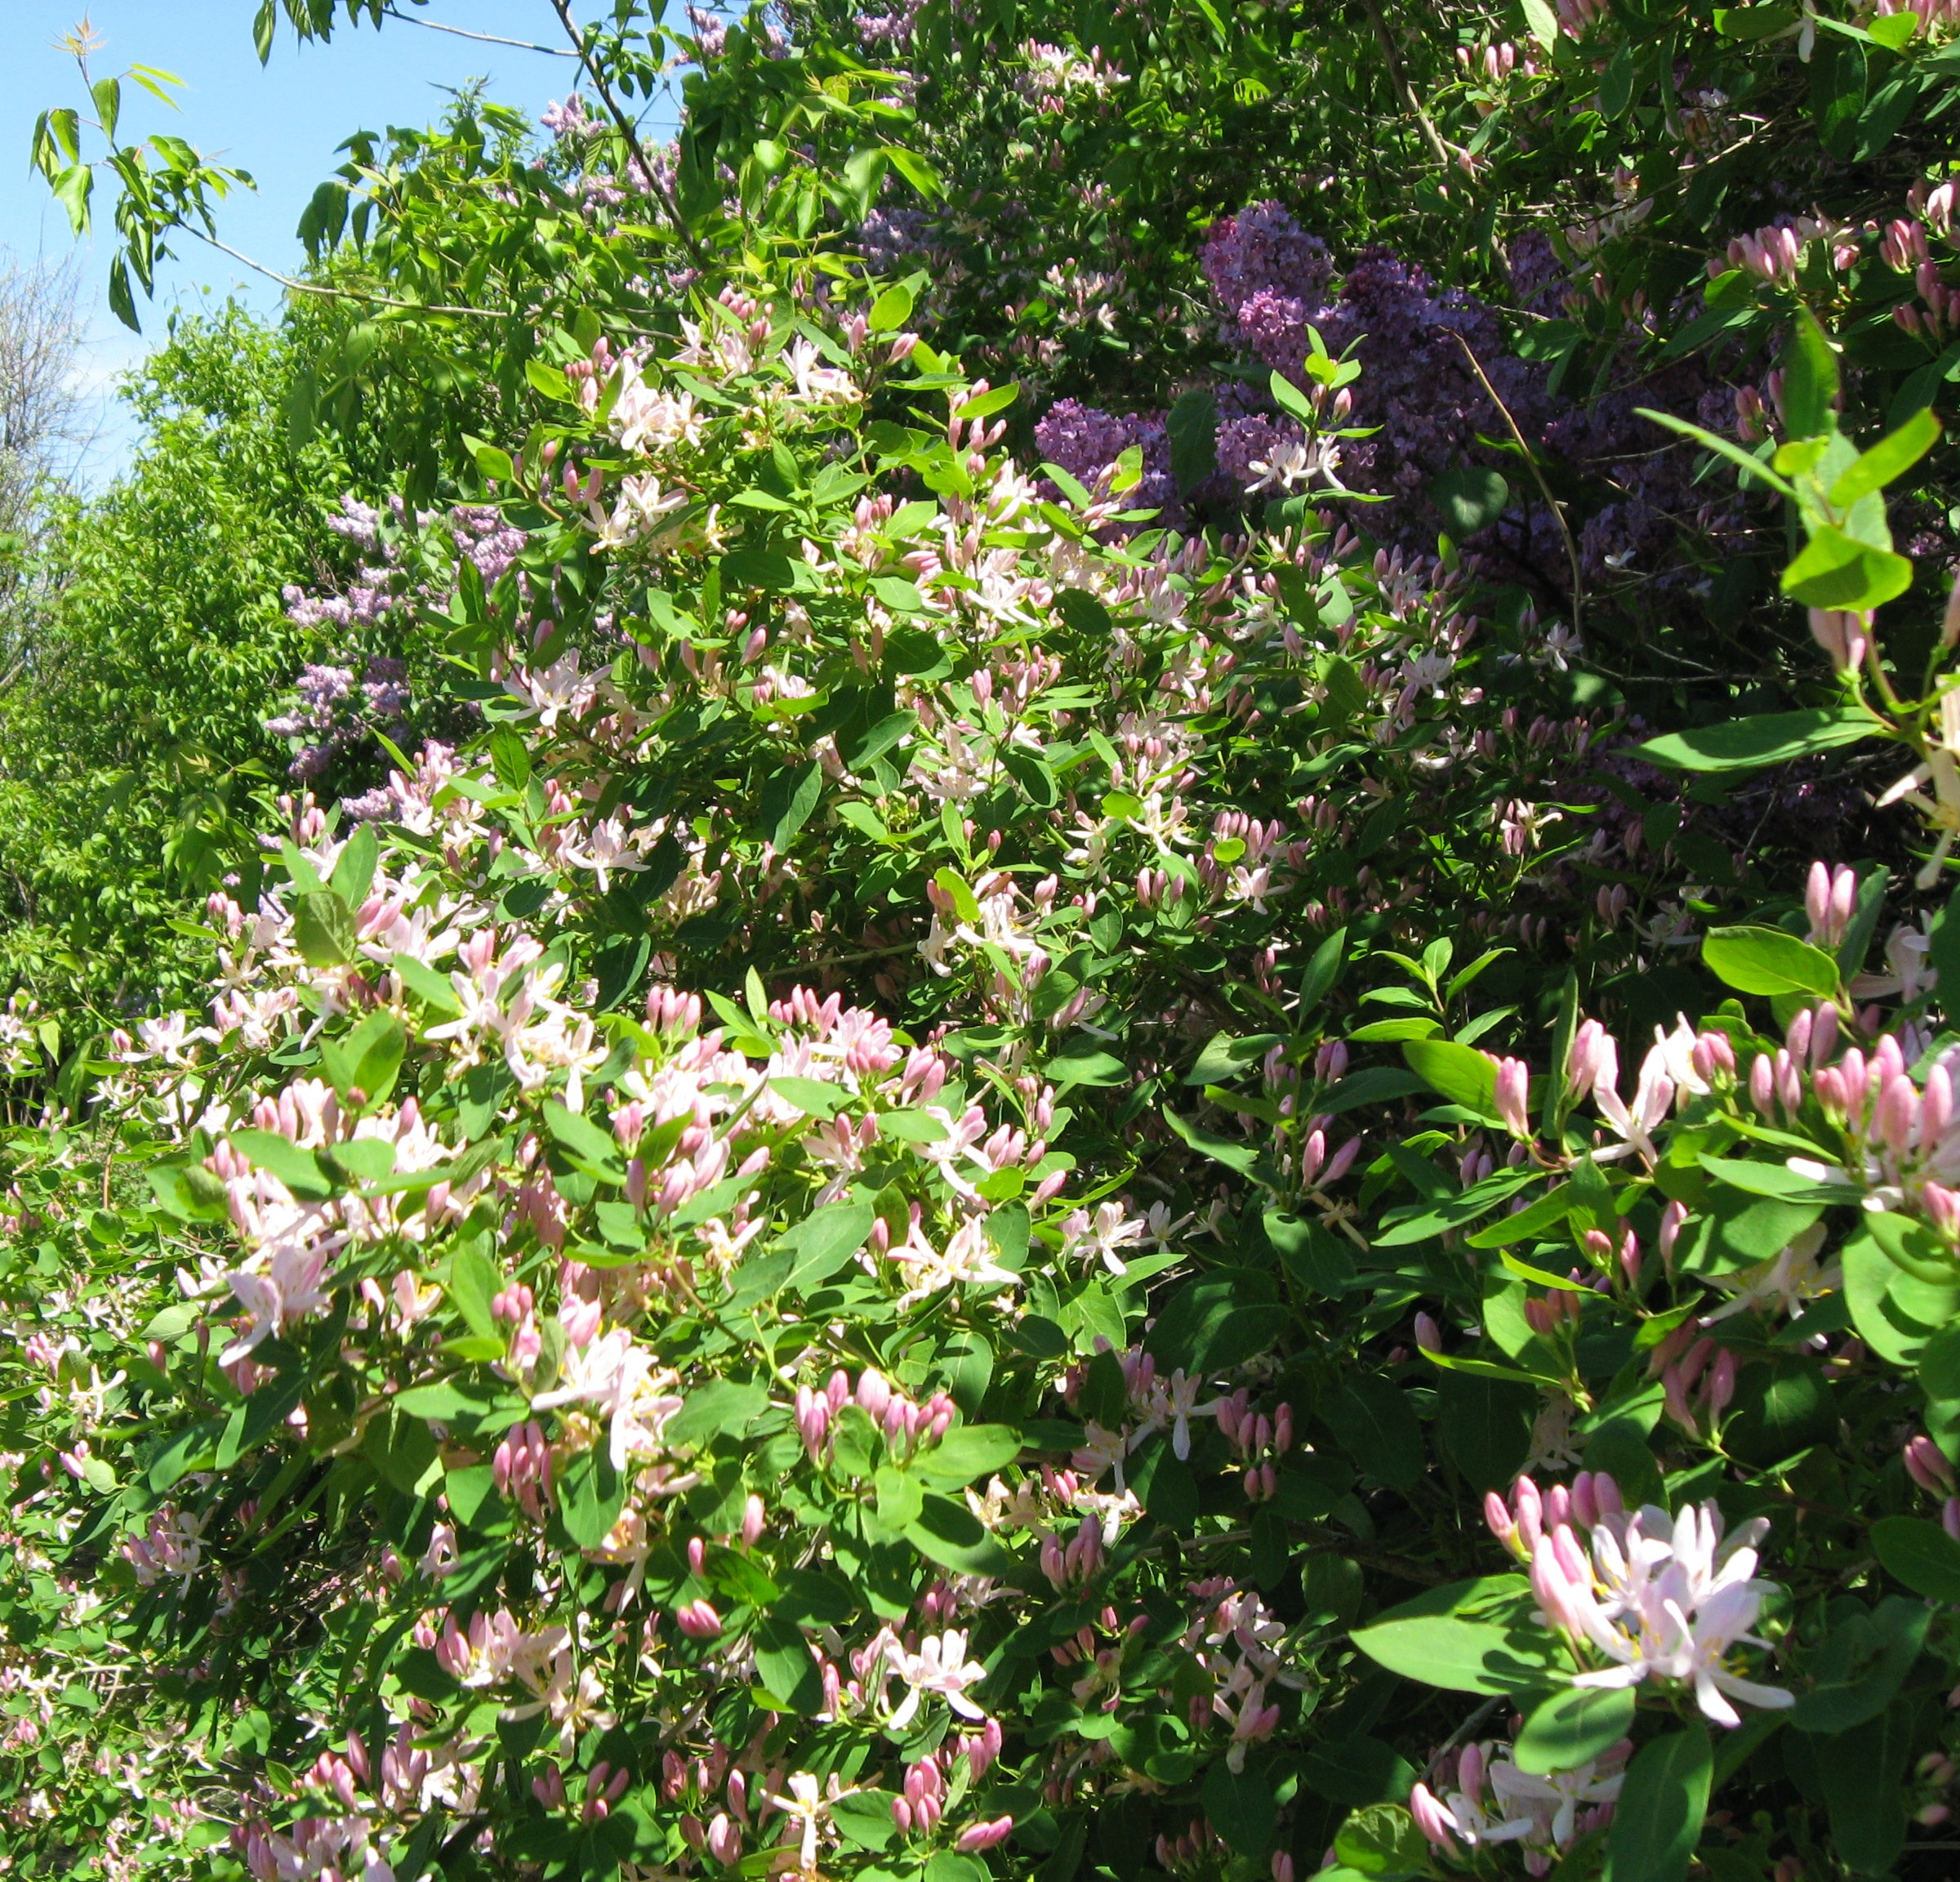 A lush, green shrub with pink and white flowers blooming from its branches.